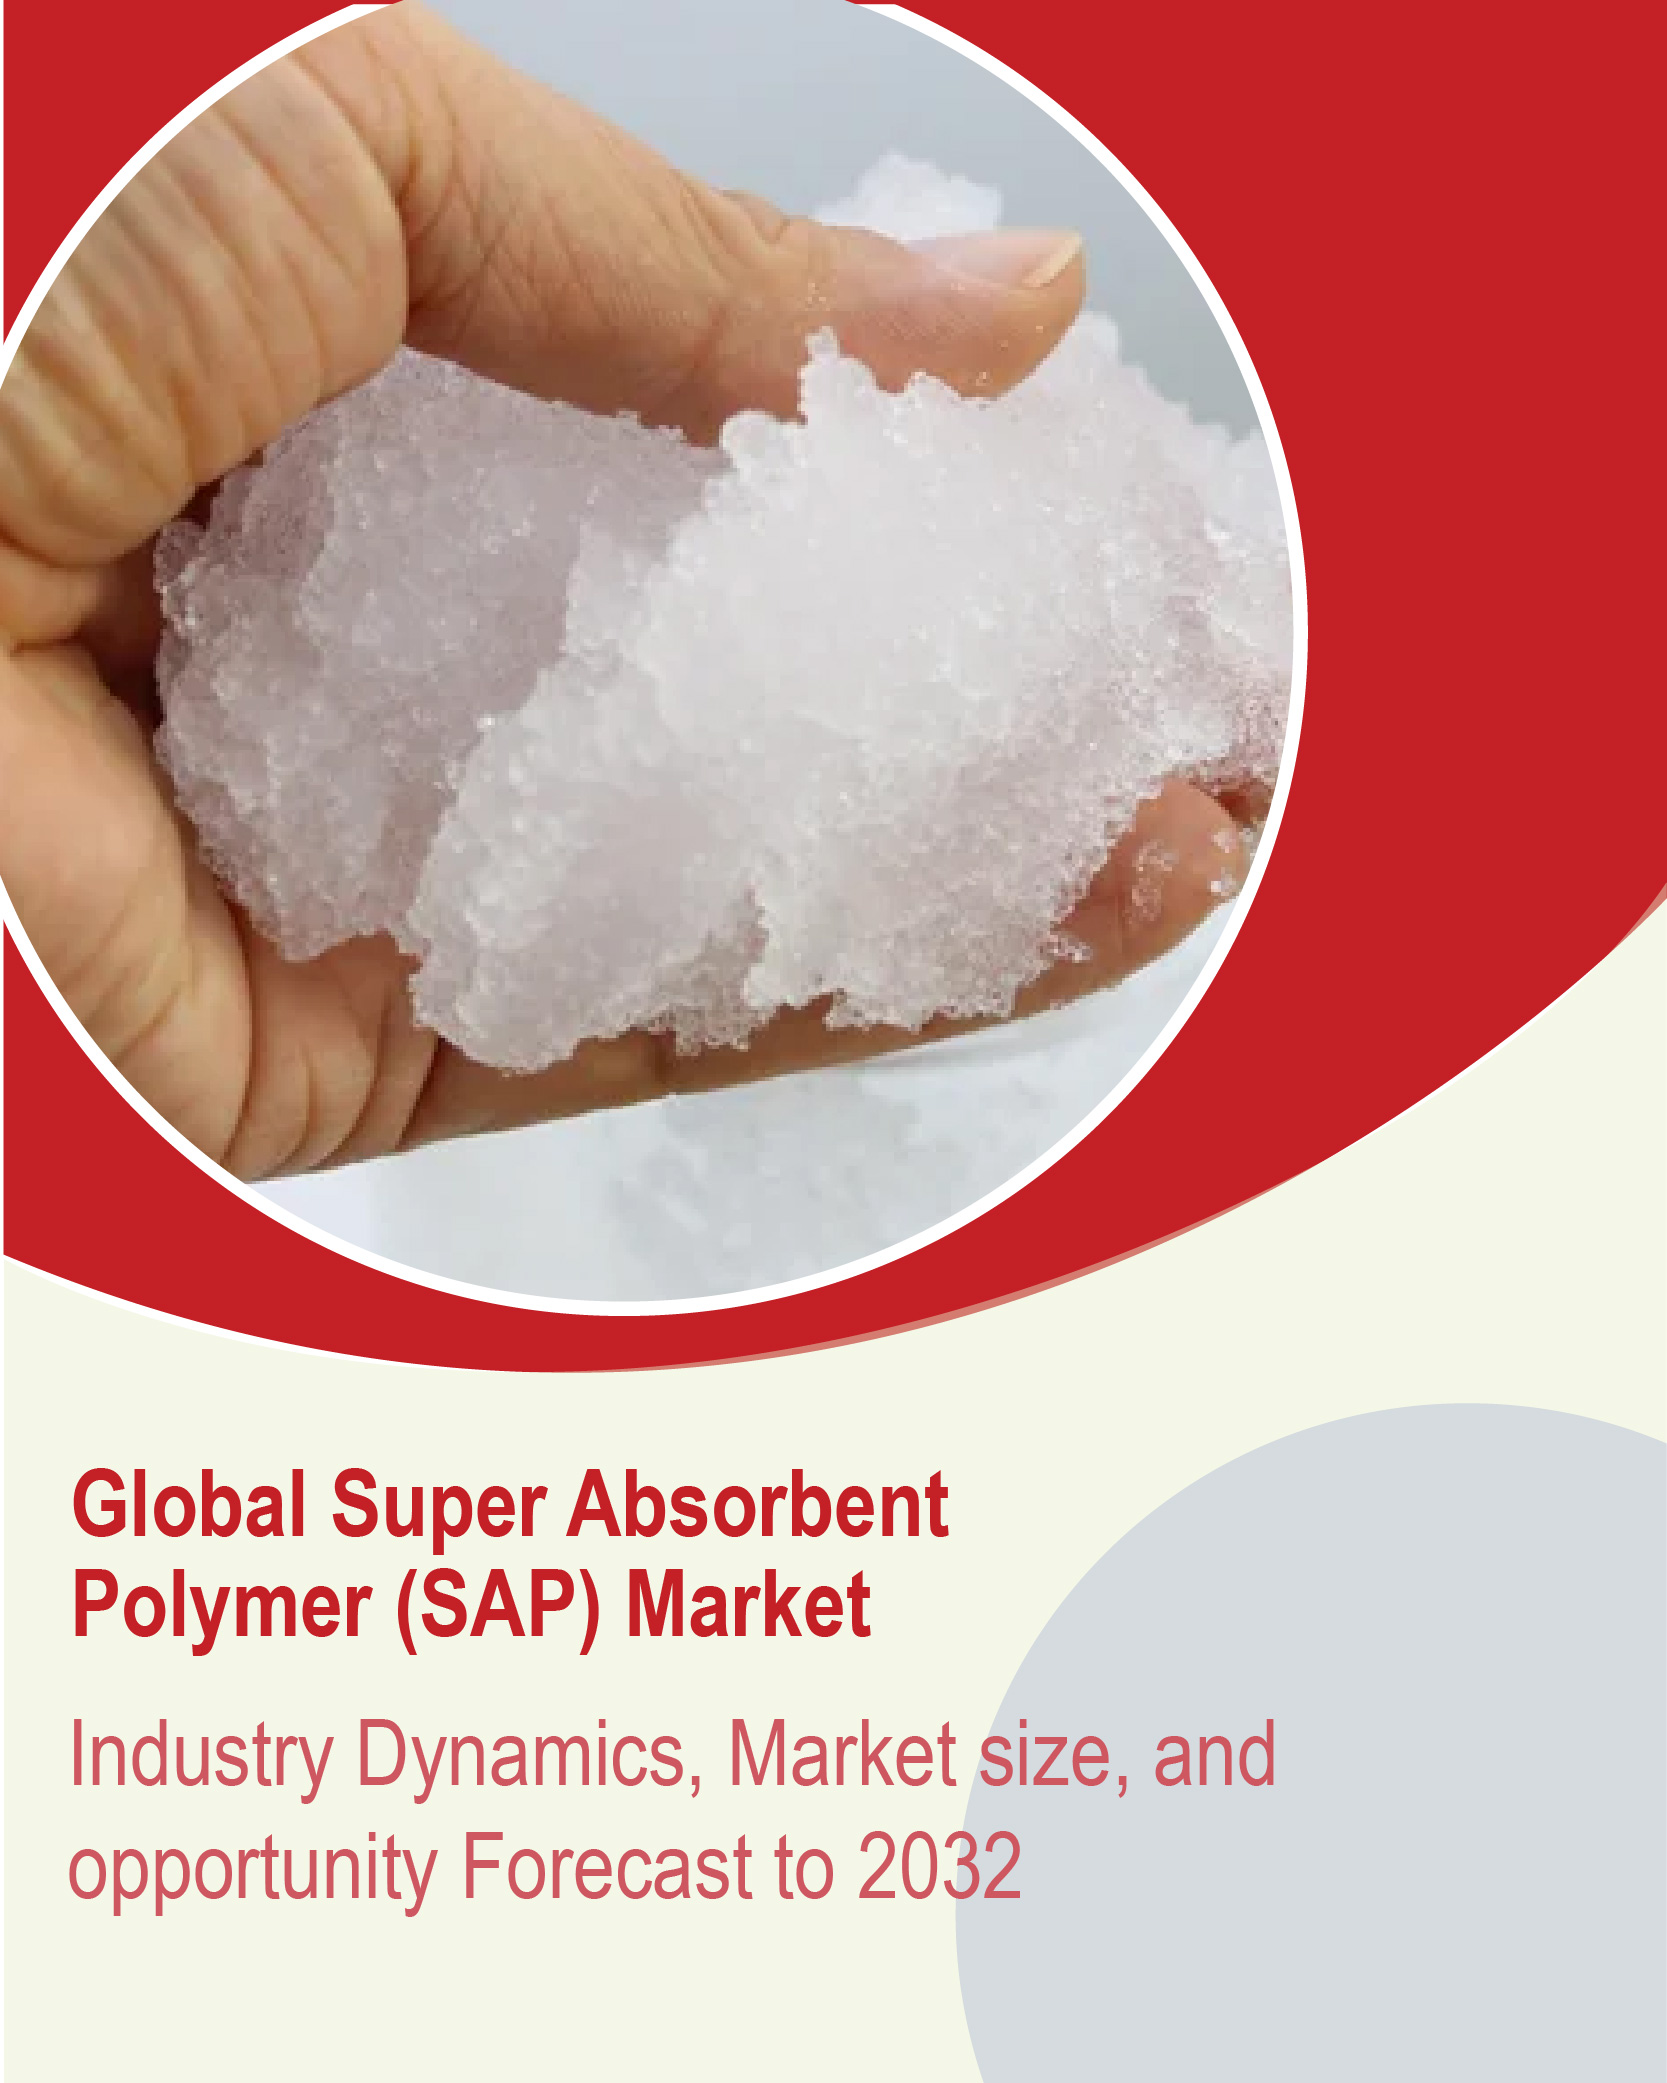 Super Absorbent Polymers (SAP)- Usage High in Personal Care